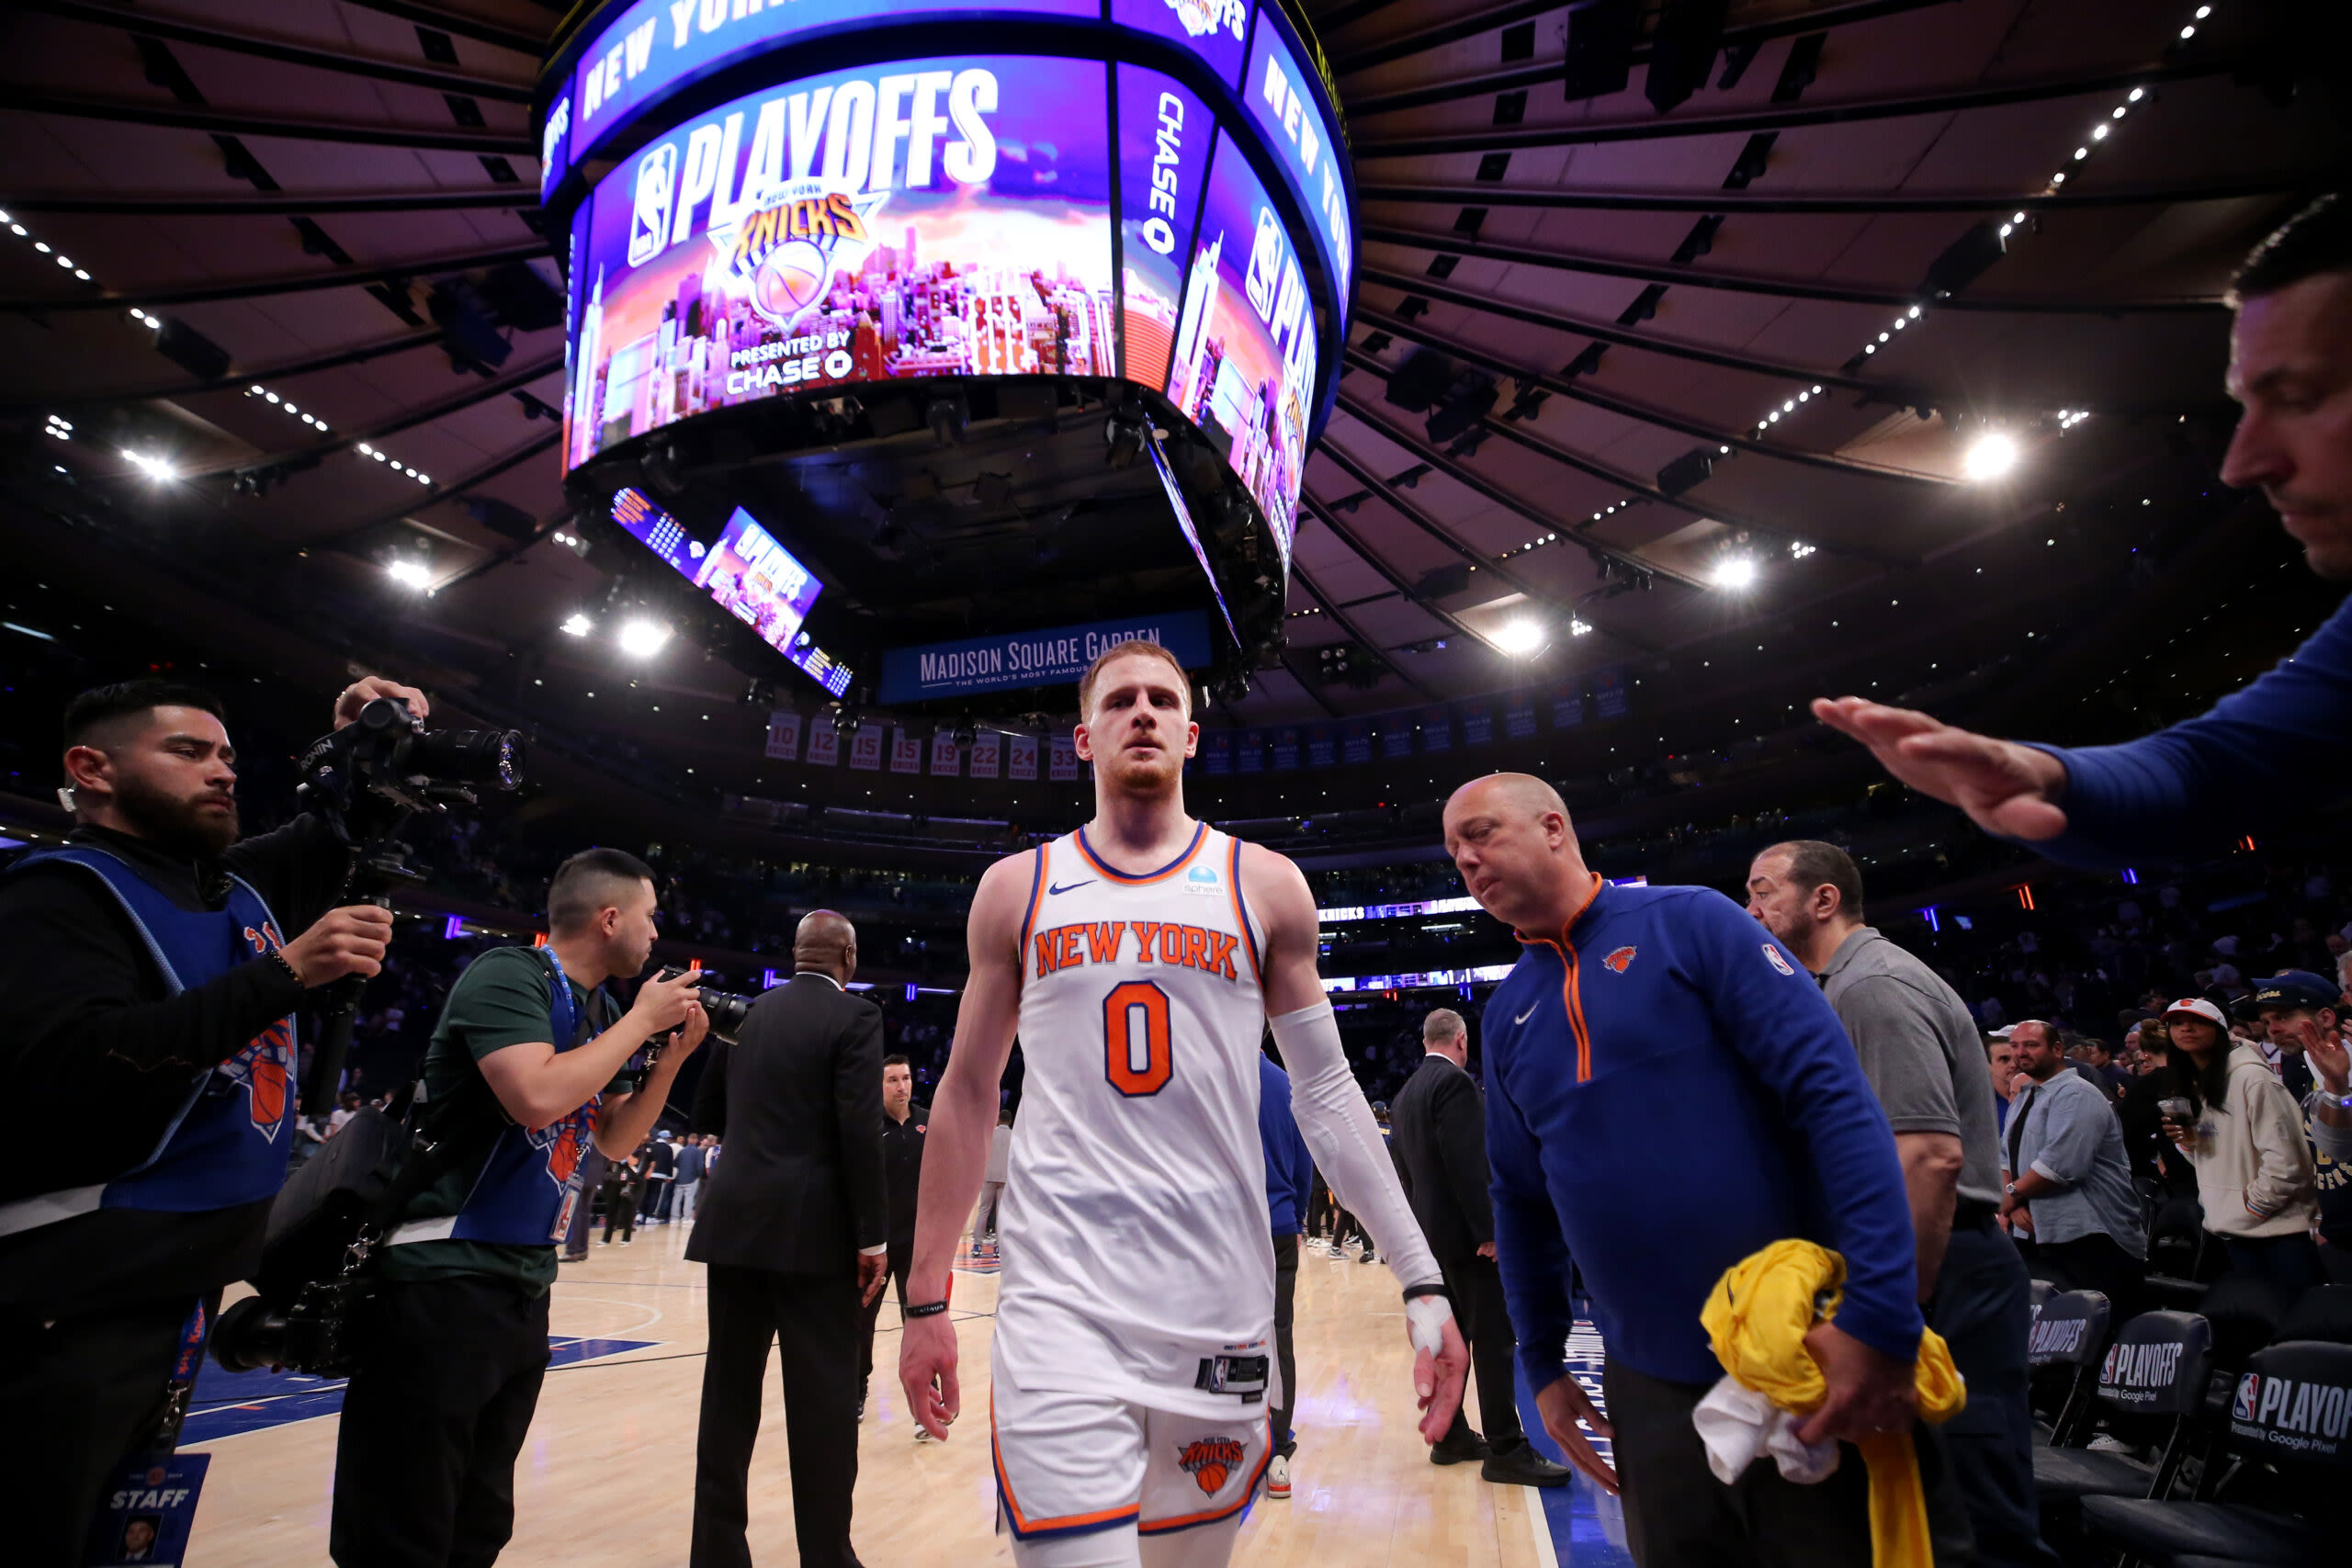 Former Warrior Donte DiVincenzo eliminated from playoffs in Knicks’ loss vs. Pacers in Game 7